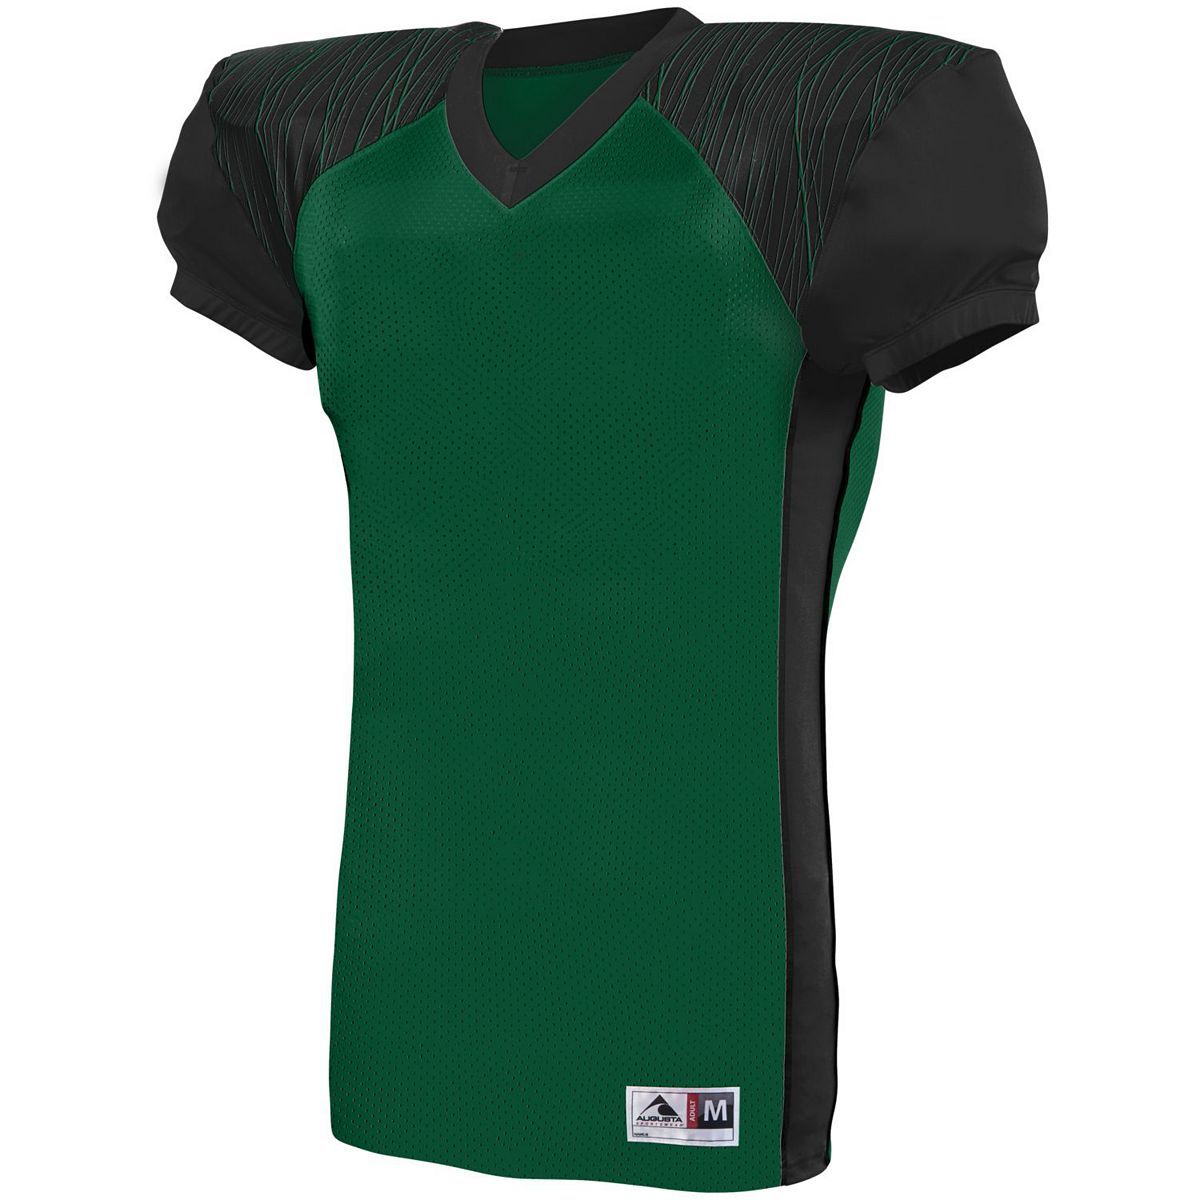 Augusta Sportswear Youth Zone Play Jersey in Dark Green/Black/Dark Green Print  -Part of the Youth, Youth-Jersey, Augusta-Products, Football, Shirts, All-Sports, All-Sports-1 product lines at KanaleyCreations.com